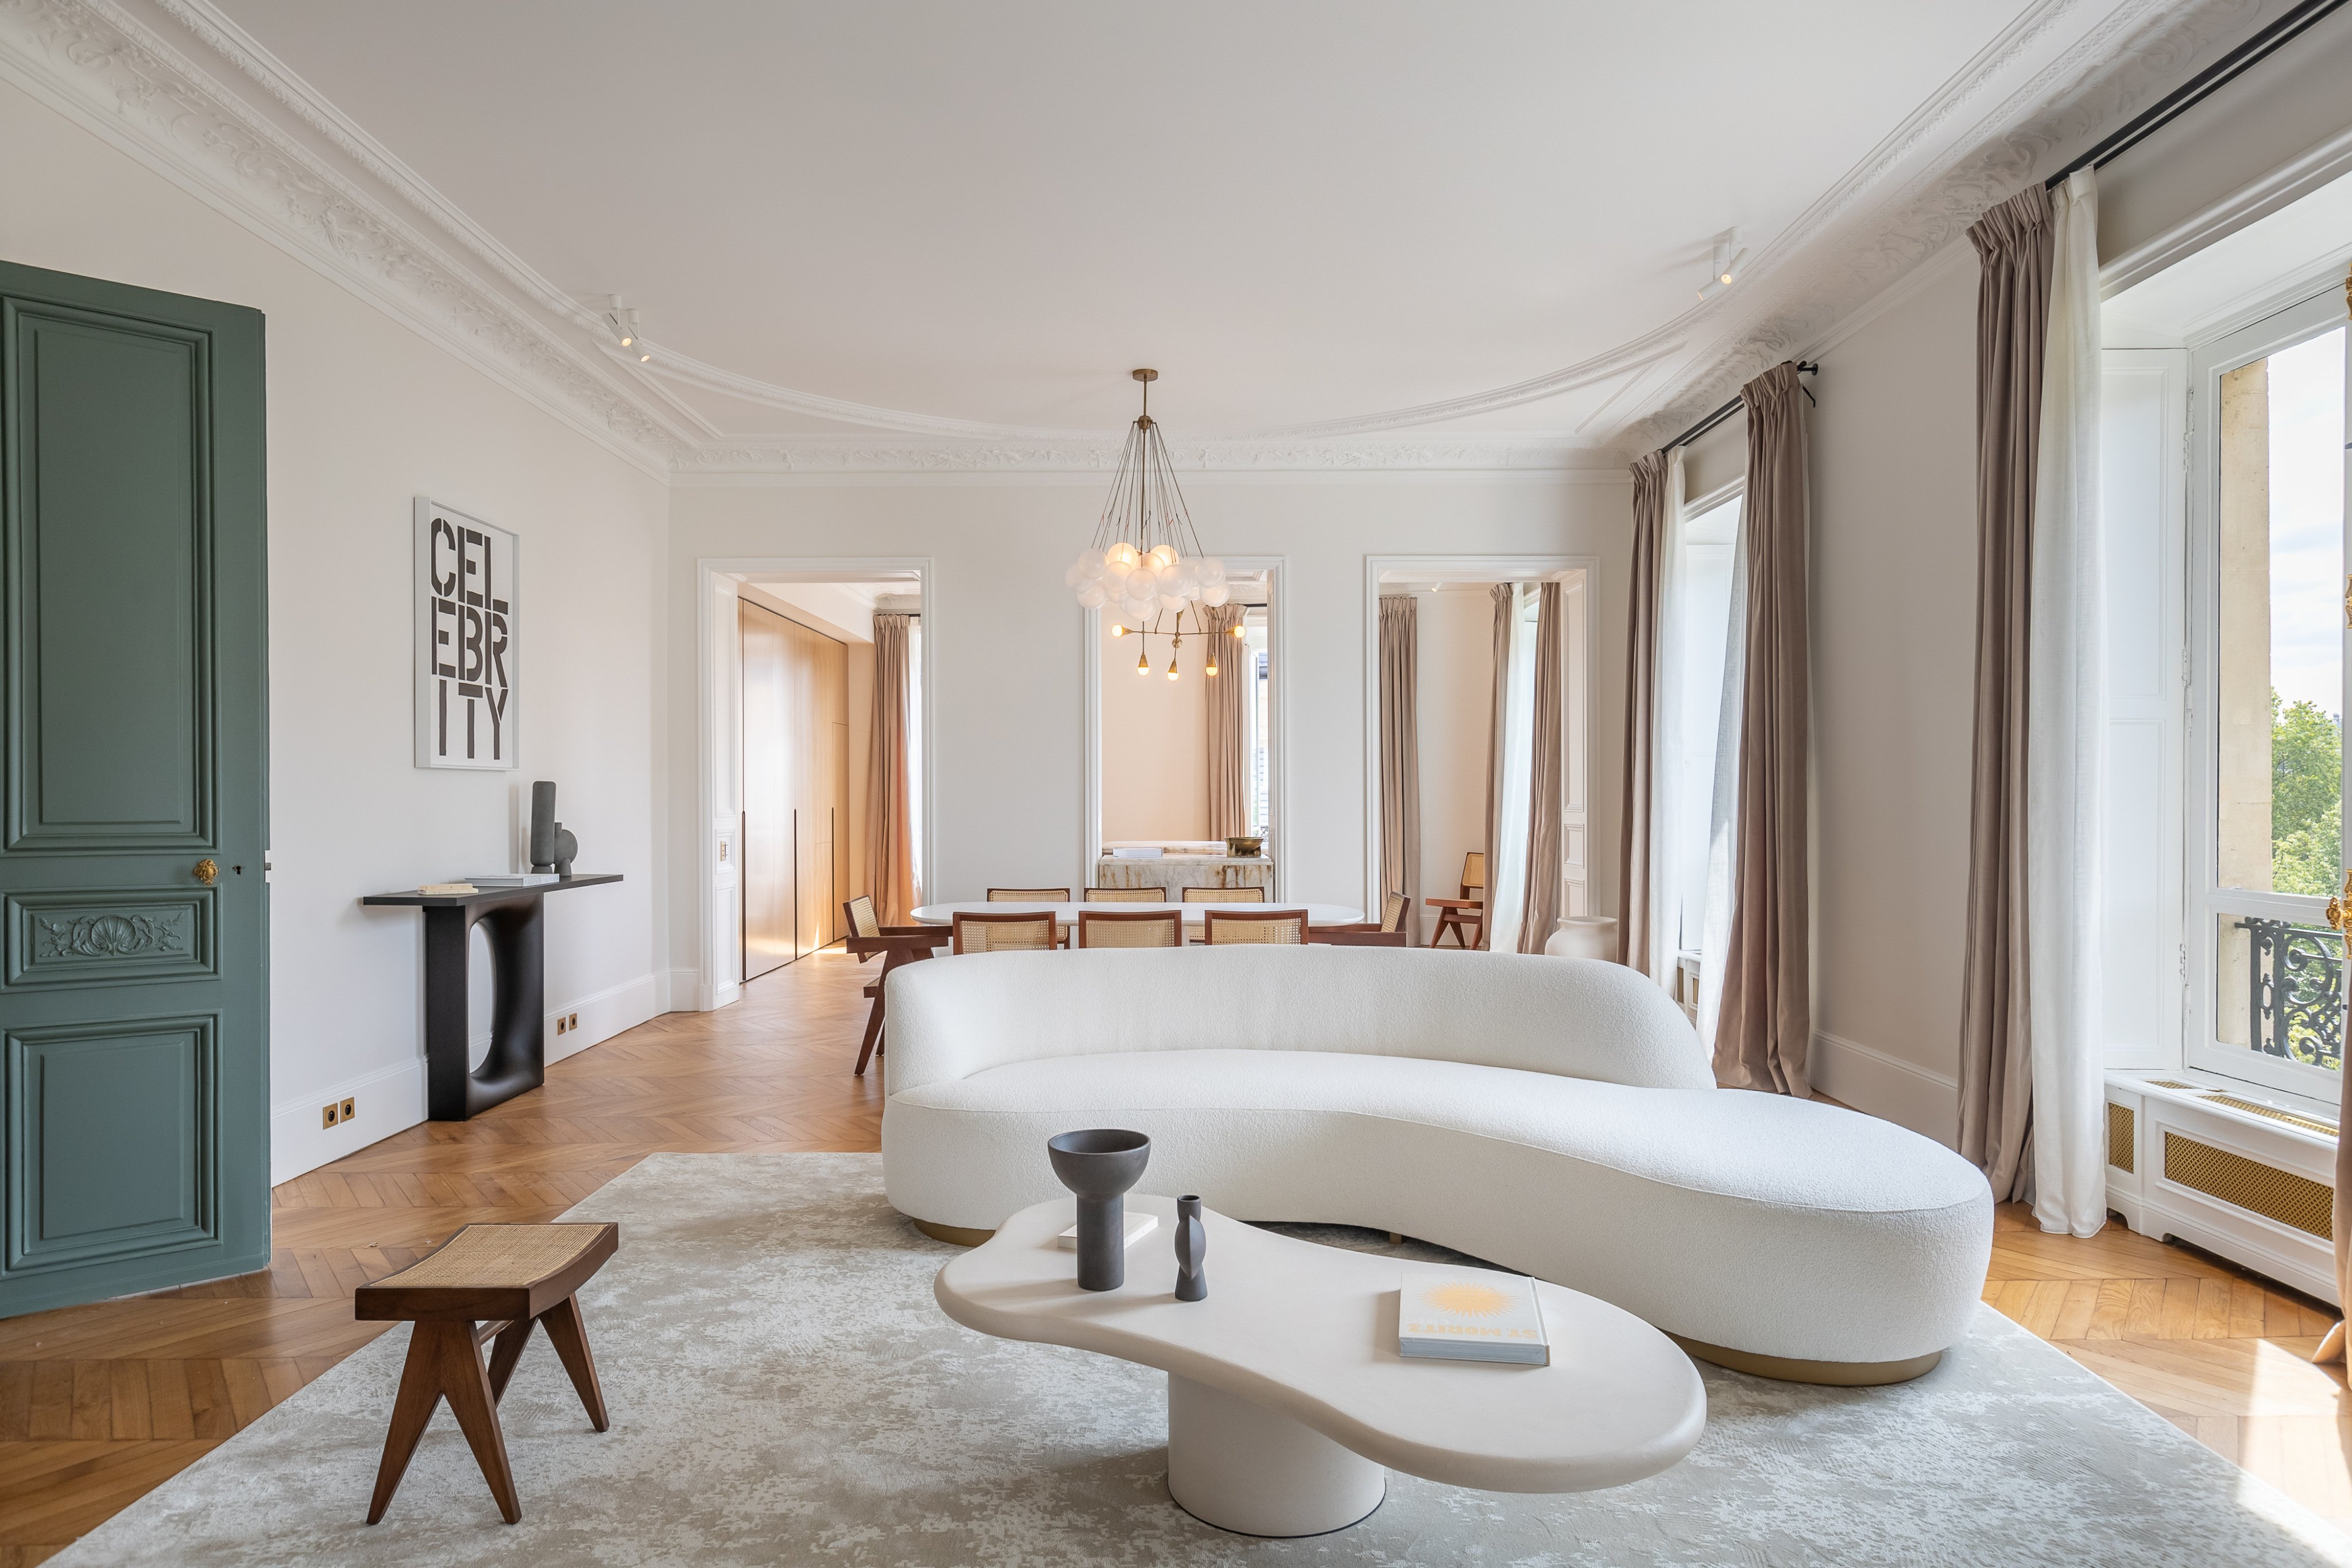 Parisian luxury real estate market in the context of the pandemic in 2021